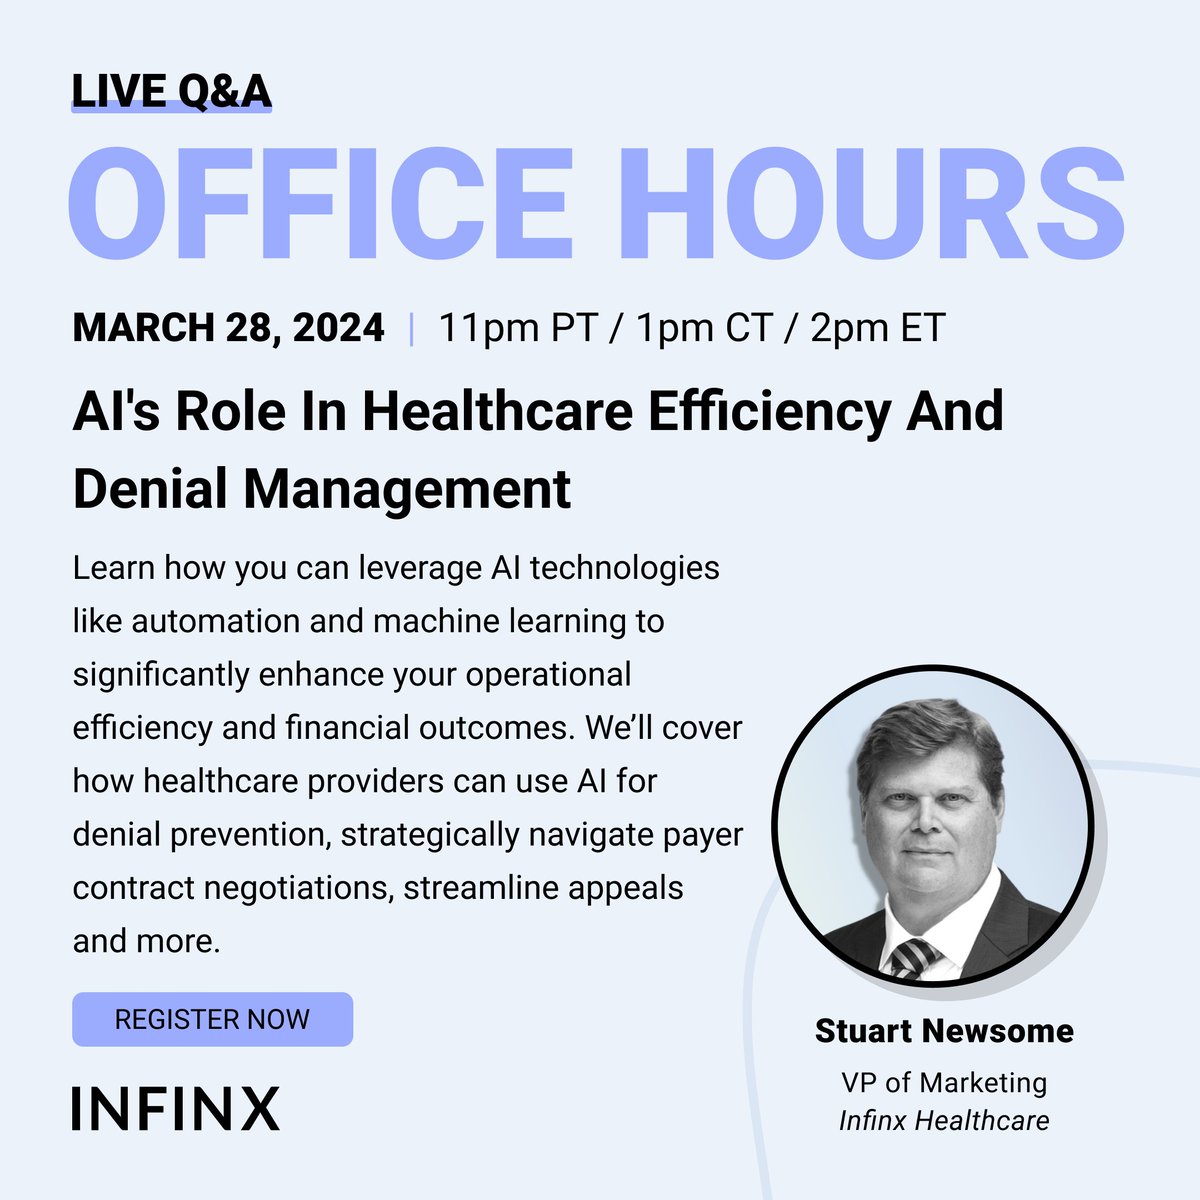 Join Stuart Newsome as he recaps the high-level takeaways & insights from the HIMSS Annual Conference & Alabama HFMA Denials Bootcamp on how AI is used in healthcare efficiency & denials management. hubs.li/Q02qPWxF0 #HealthcareTech #DenialsManagement #AI #MachineLearning